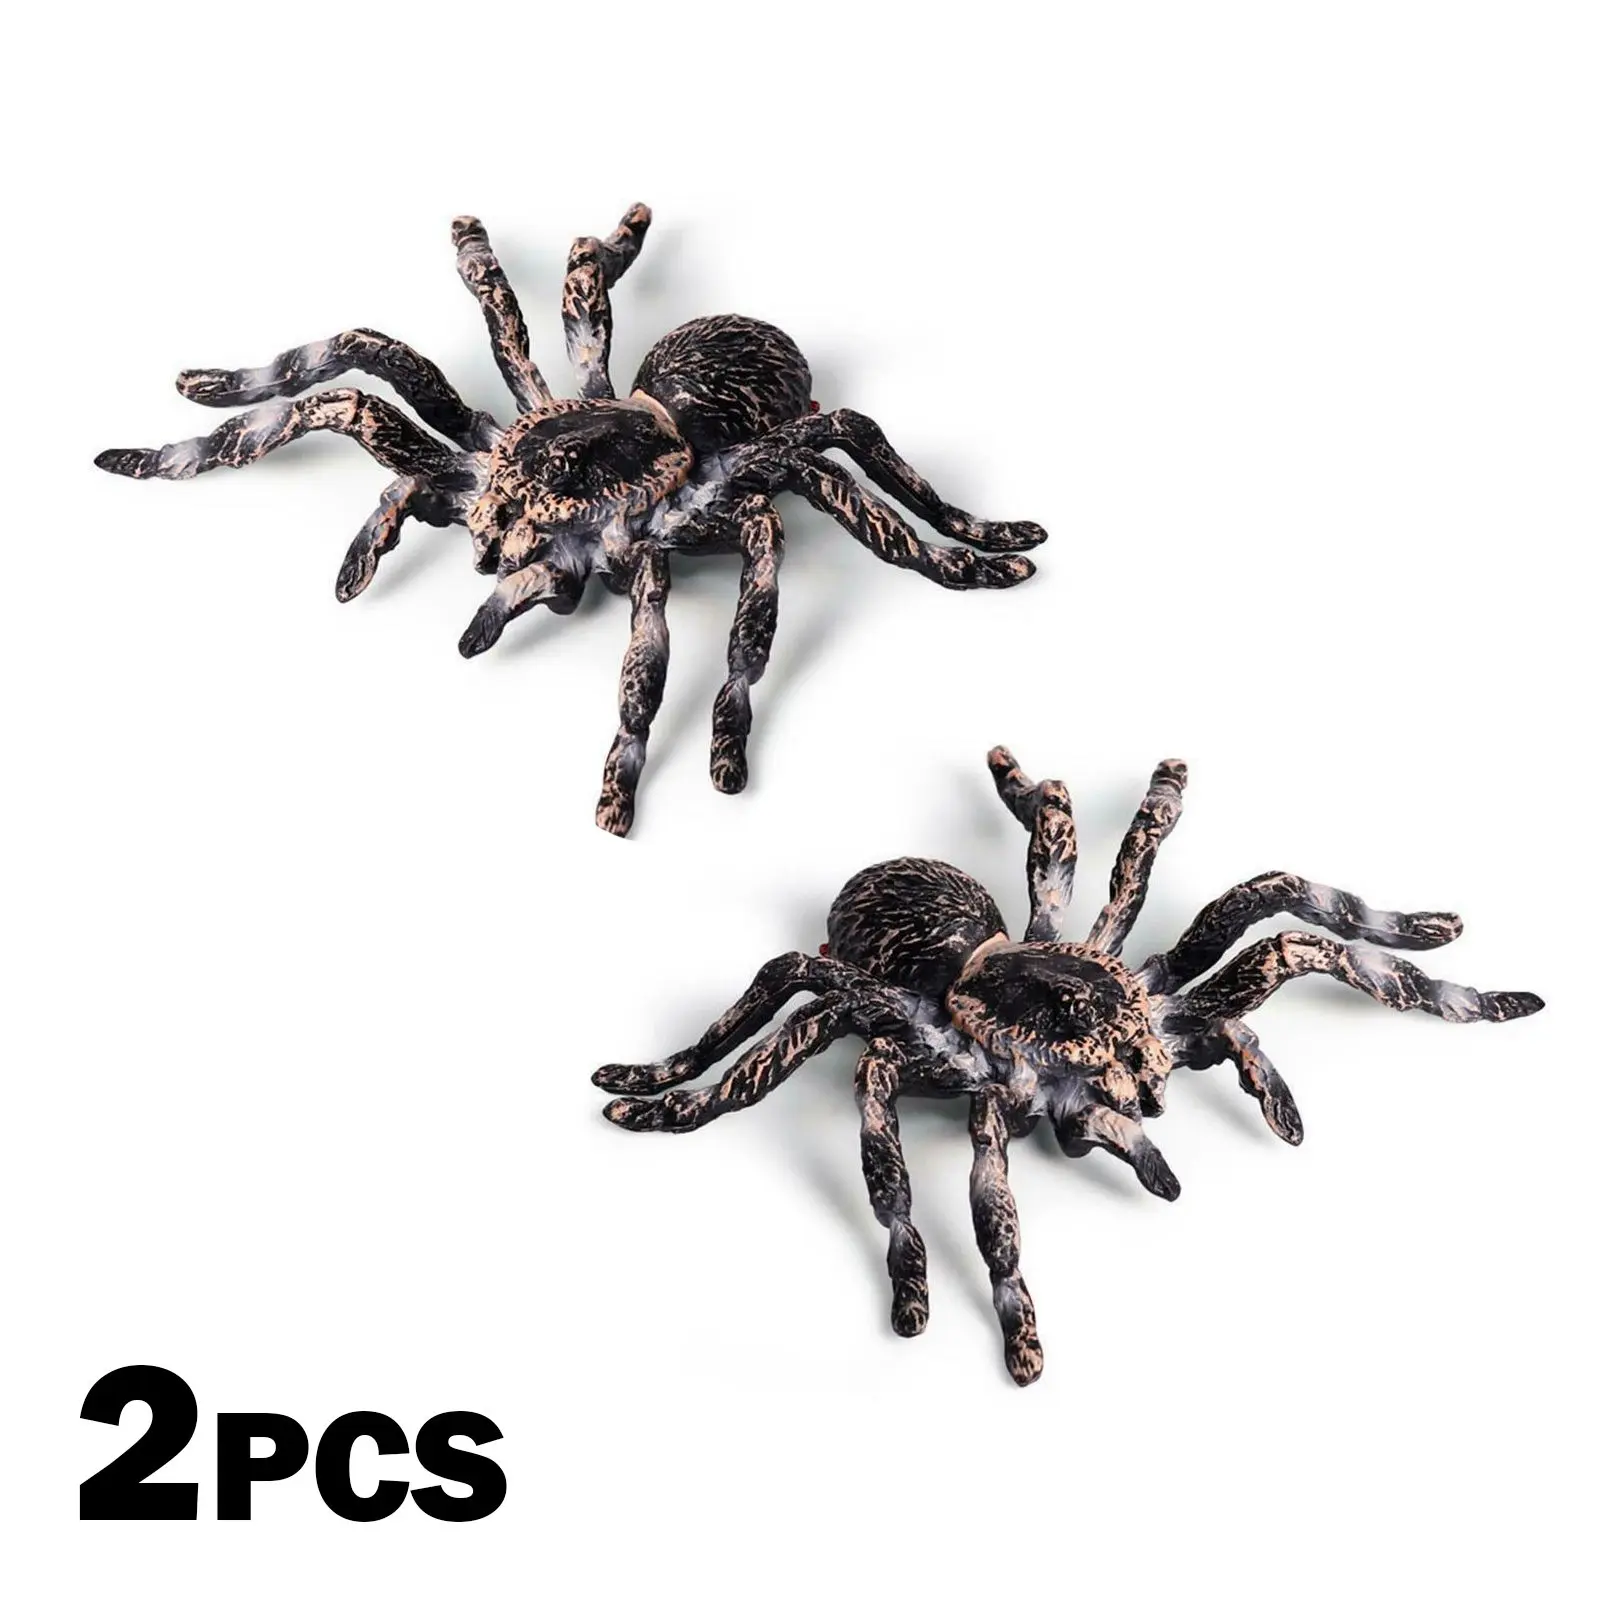 2X Fake Realistic Spider Toy Insect Model Halloween Joke Prank Props Scary Toys 